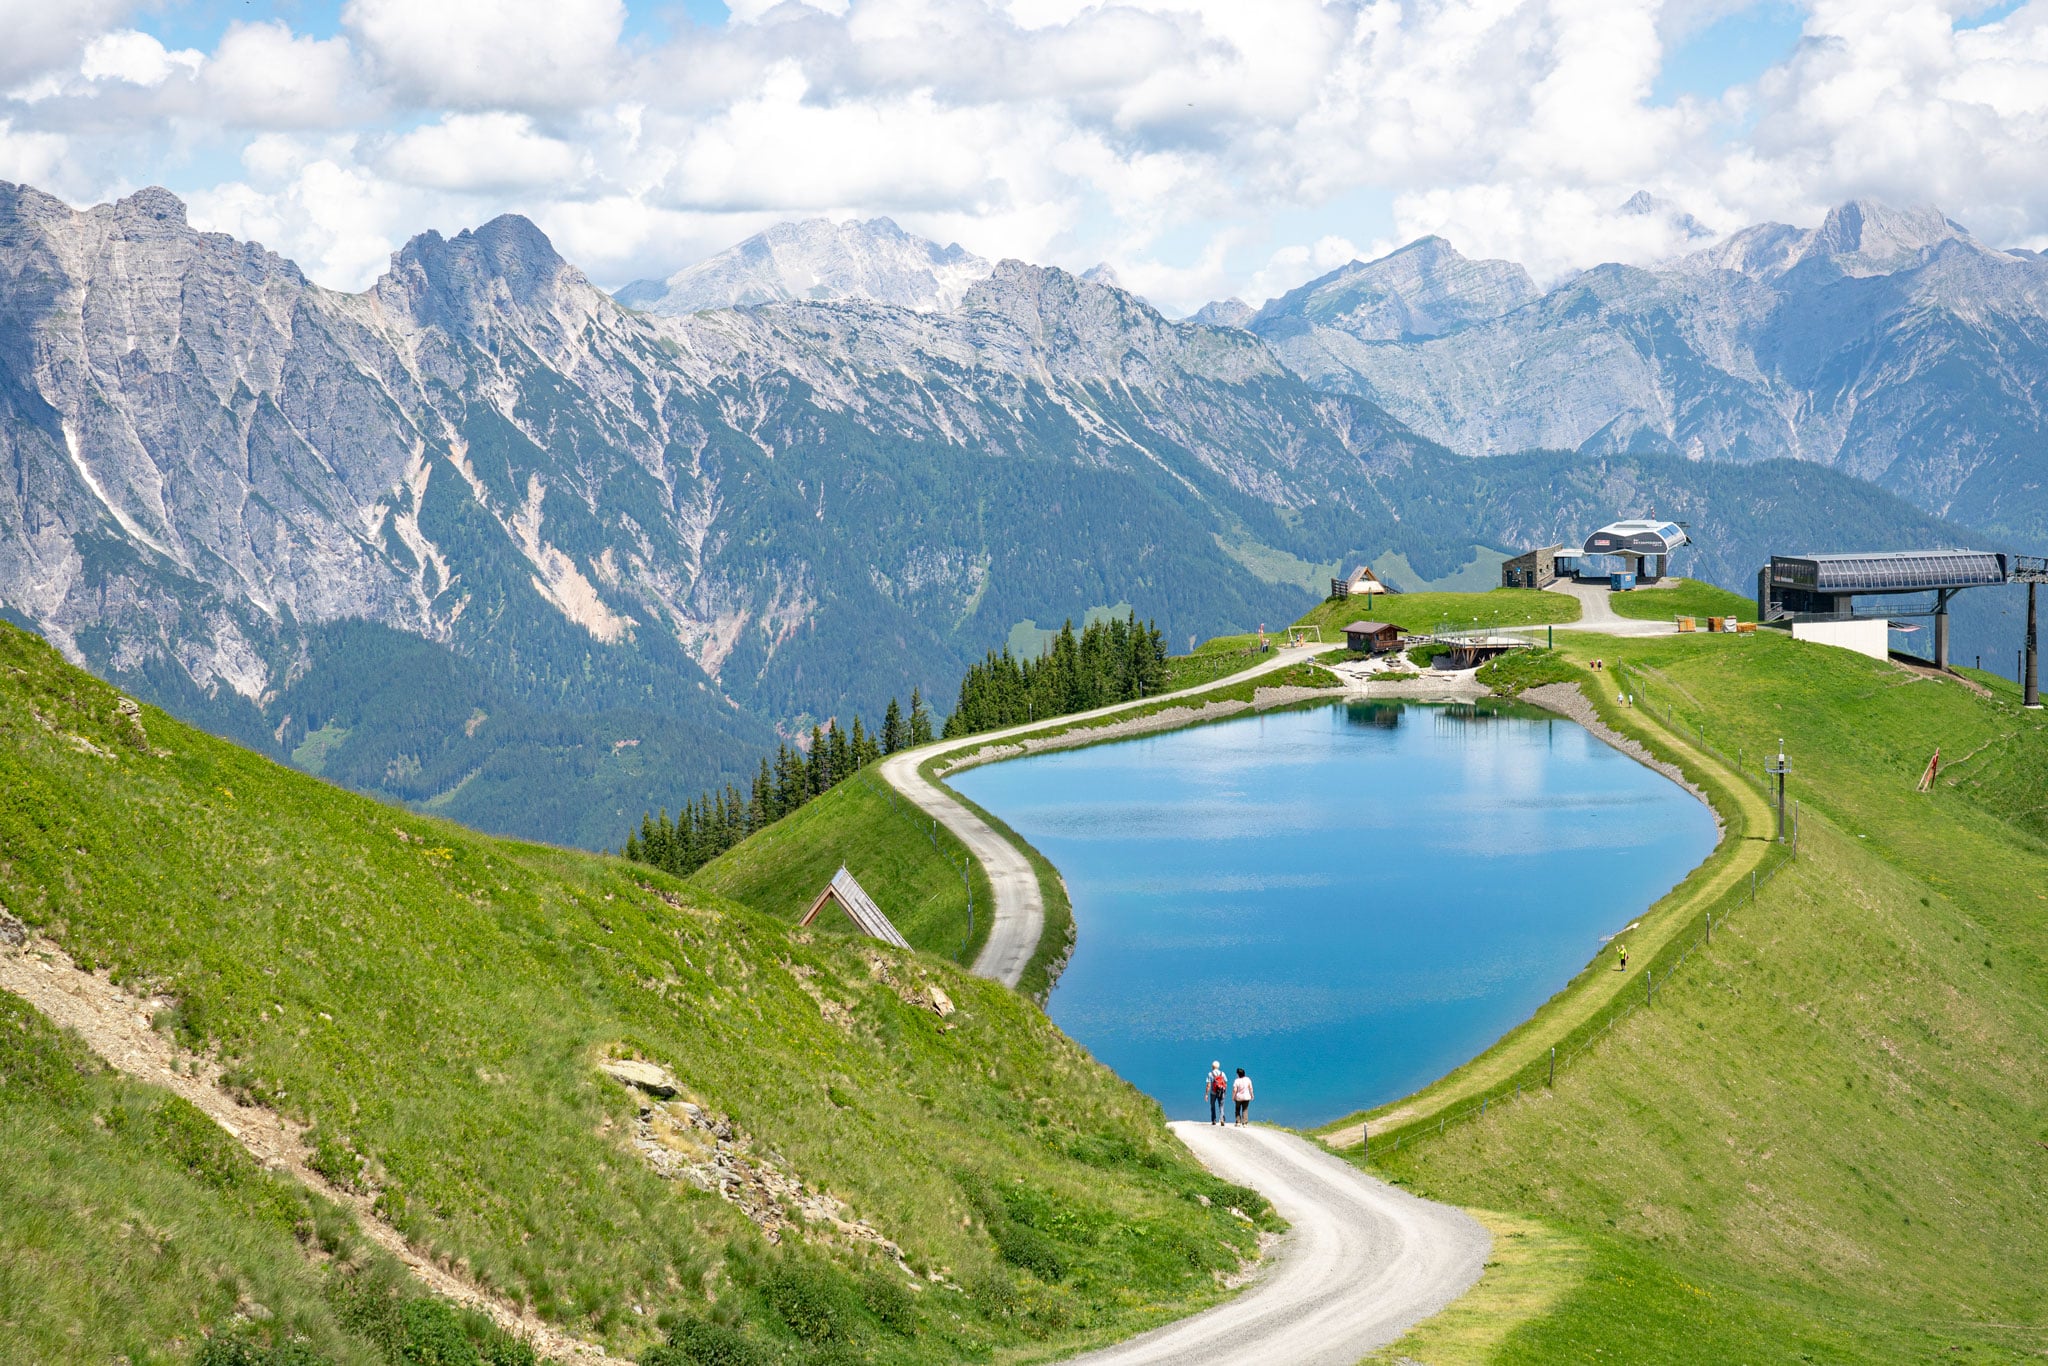 Hiking The Asitz Mountain is one of the best things to do in Austria